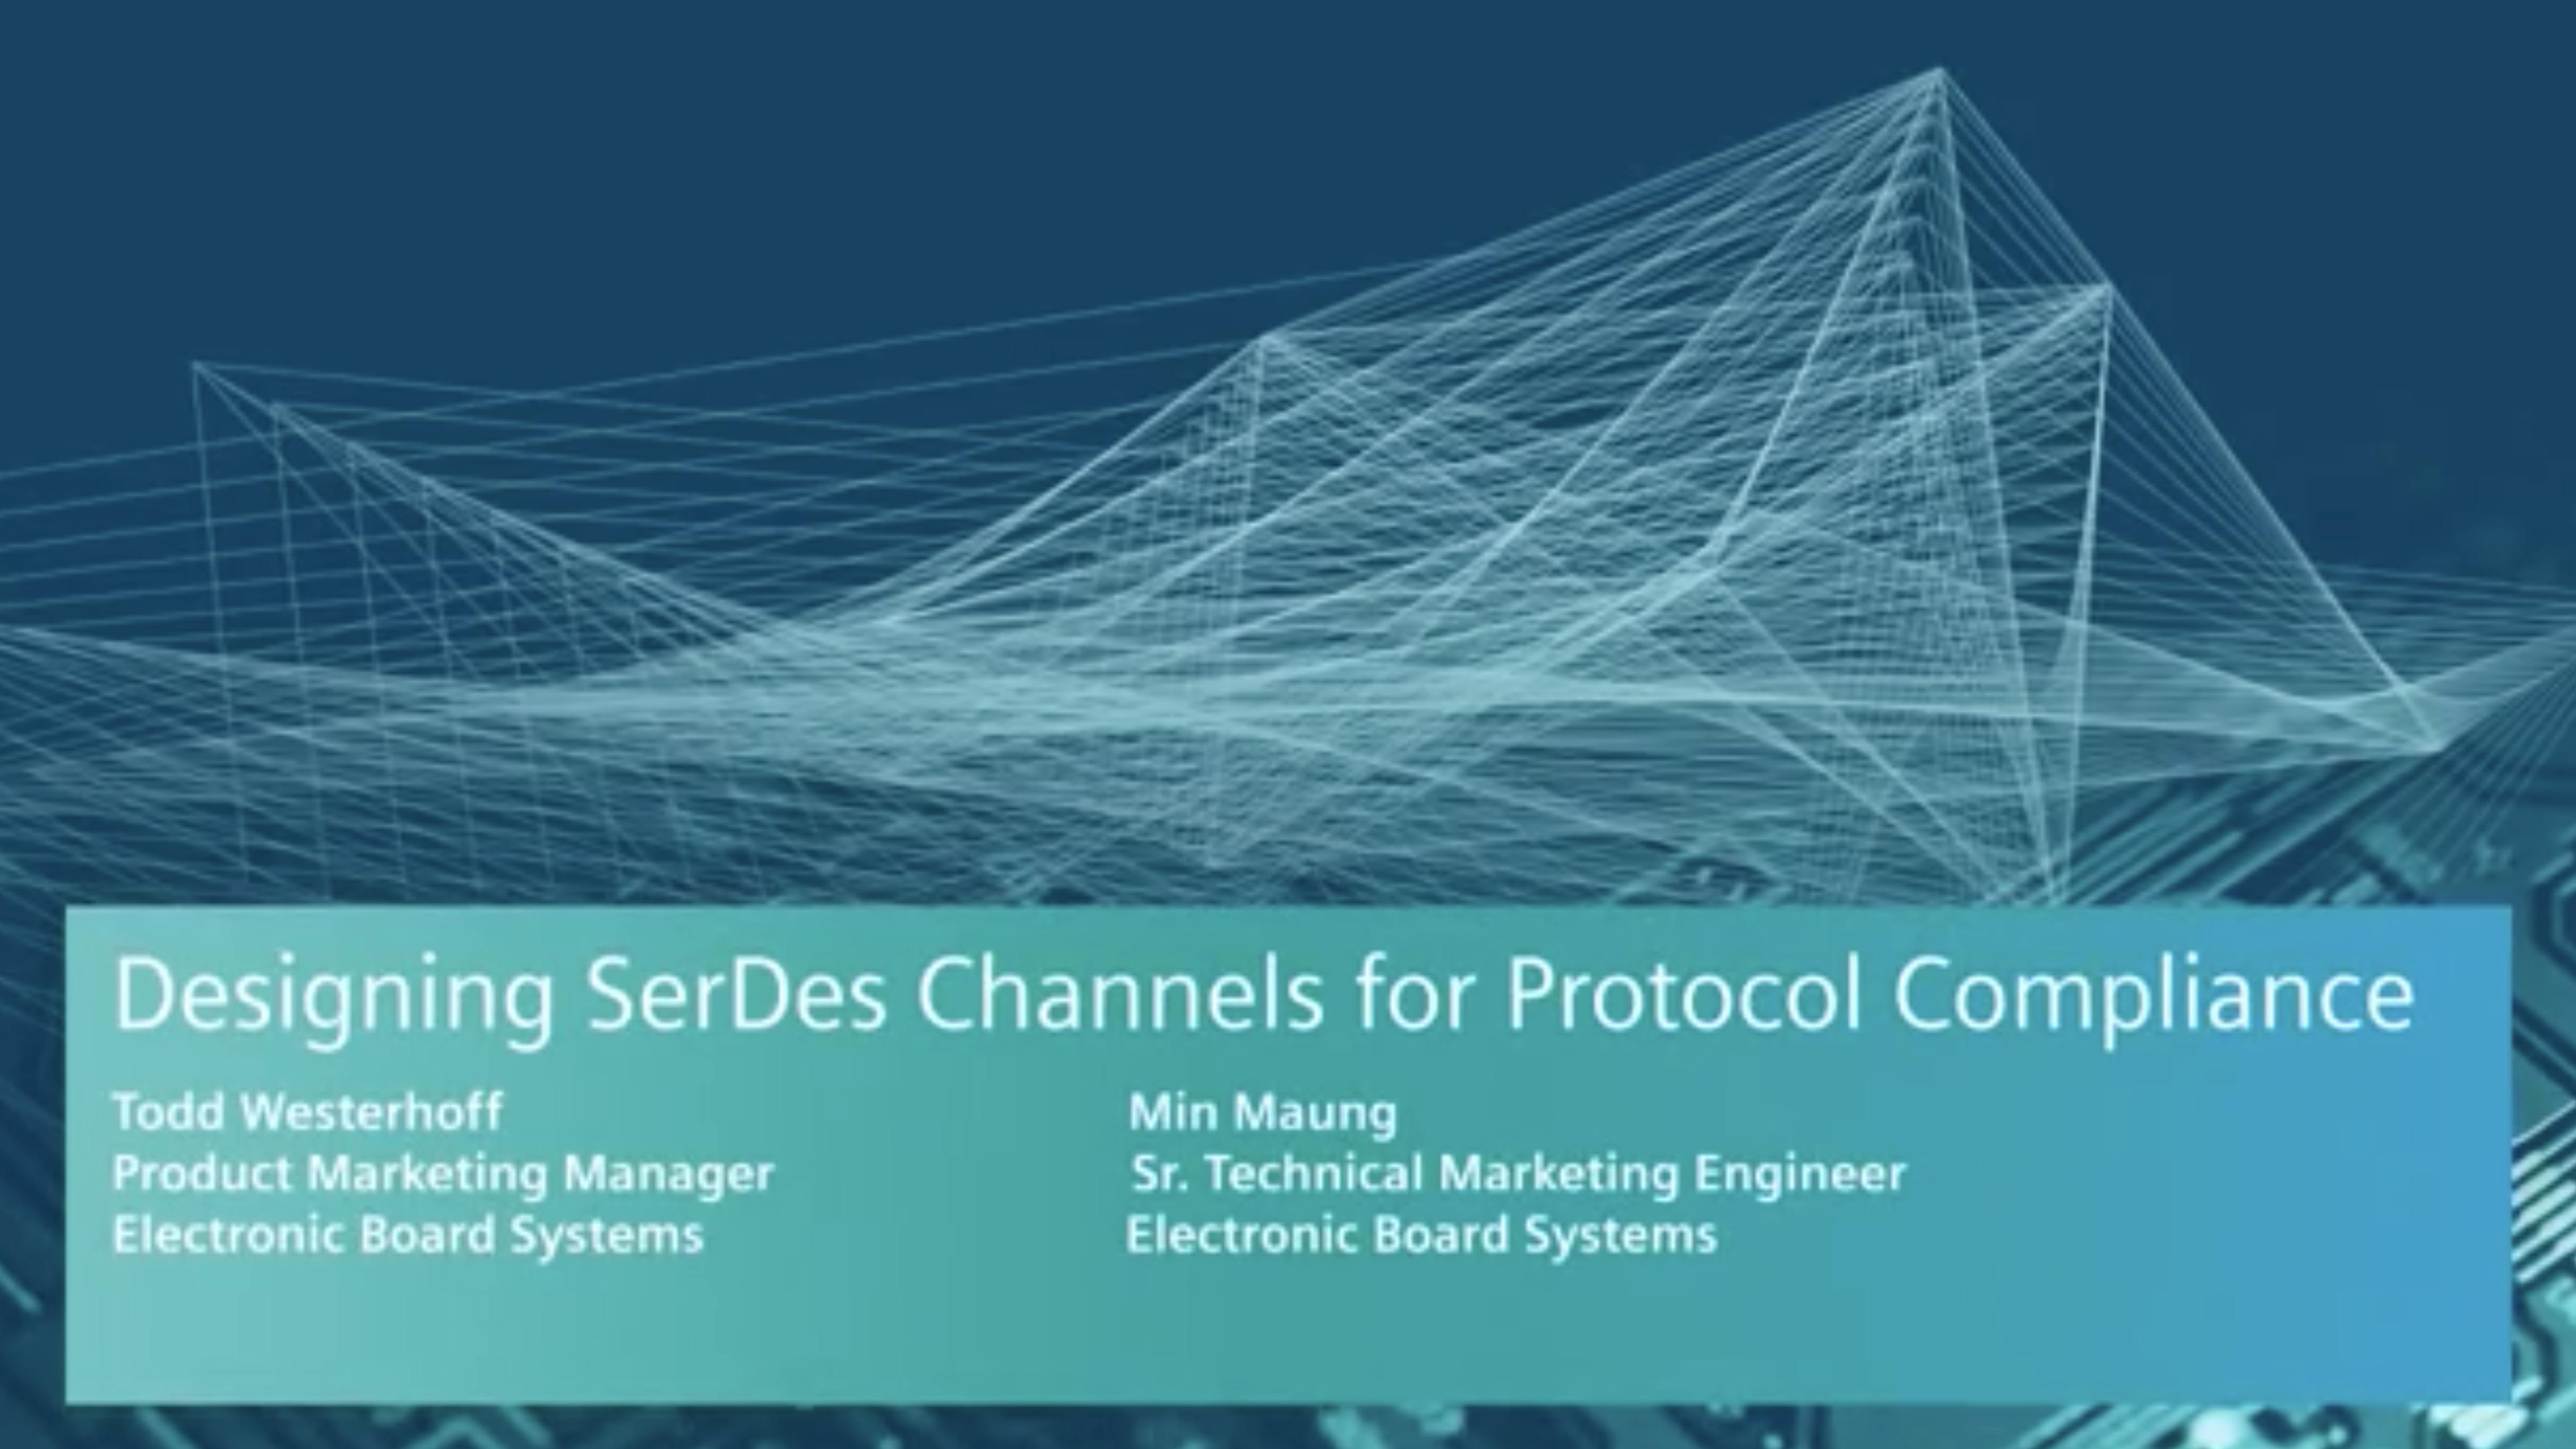 Designing SerDes channels for protocol compliance